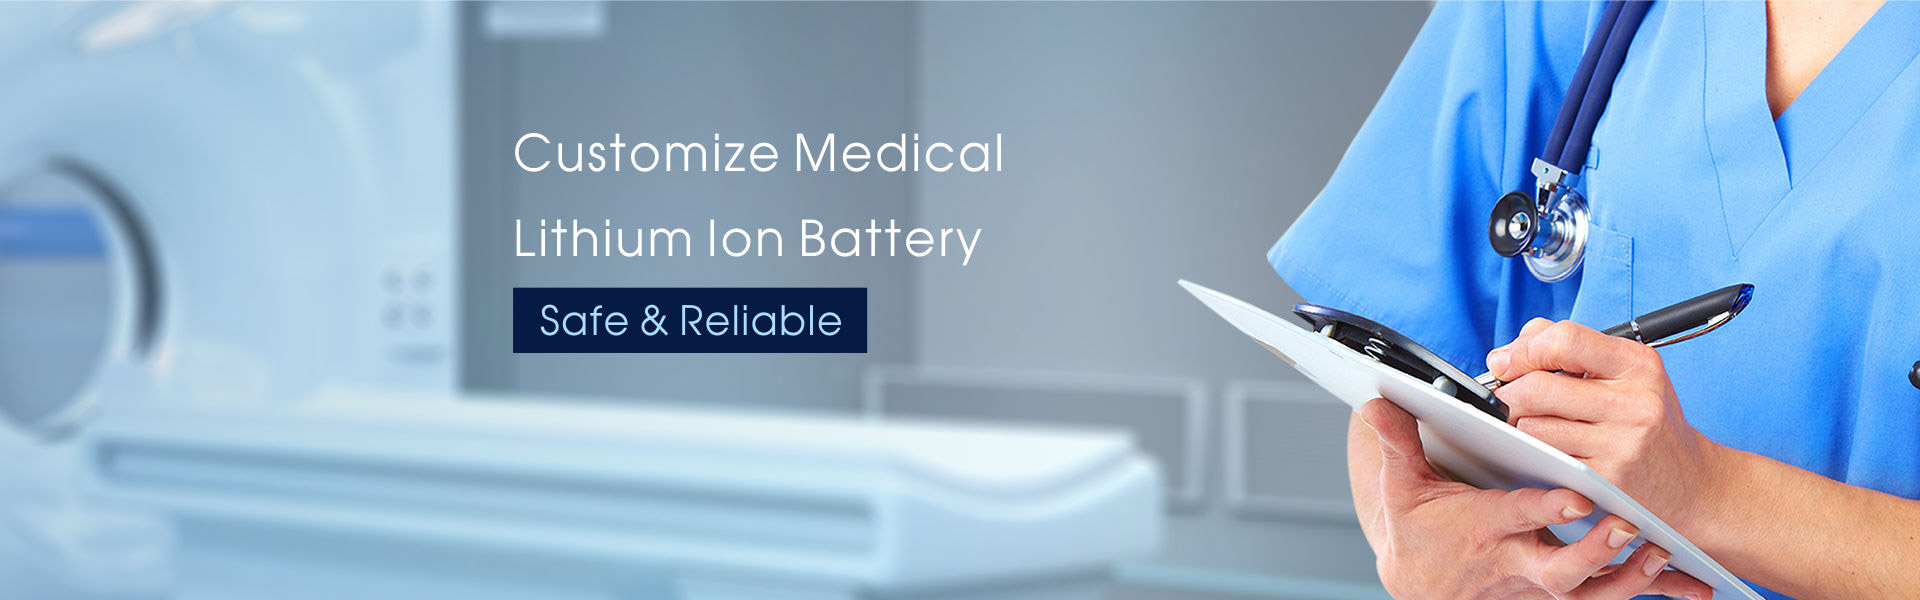 Customized Medical Lithium Ion Battery